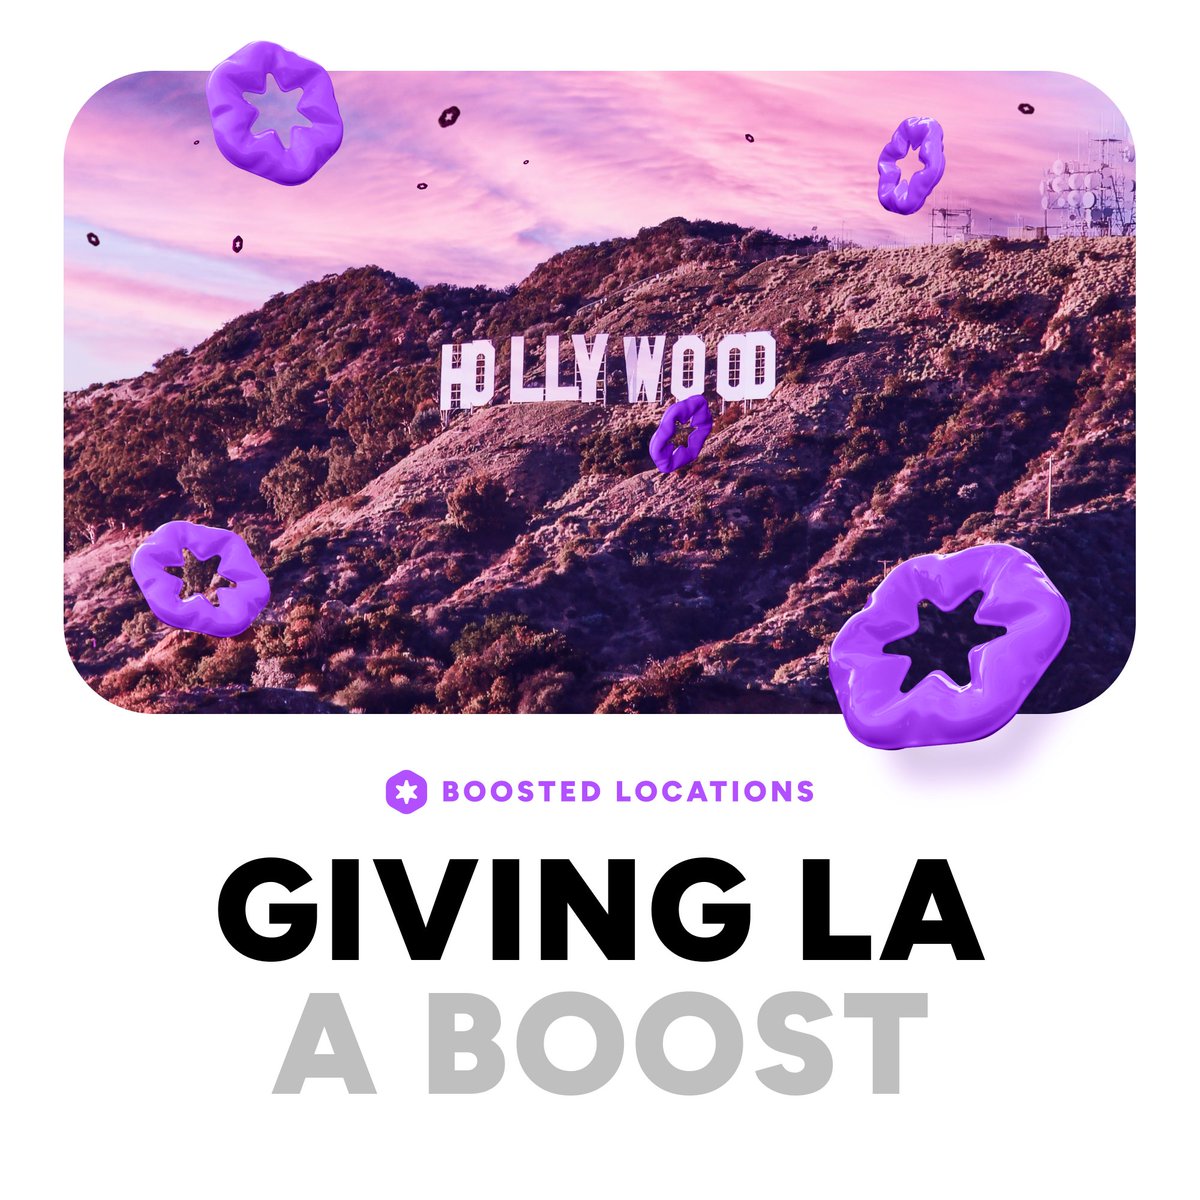 Boosted Locations are now rolling out across LA!🌆 Helium Mobile Hotspots deployed in these locations can earn extra MOBILE rewards for creating coverage where it's needed the most. Learn more about Boosted Locations👉blog.hellohelium.com/boostedlocatio… #HeliumMobile #LACoverage